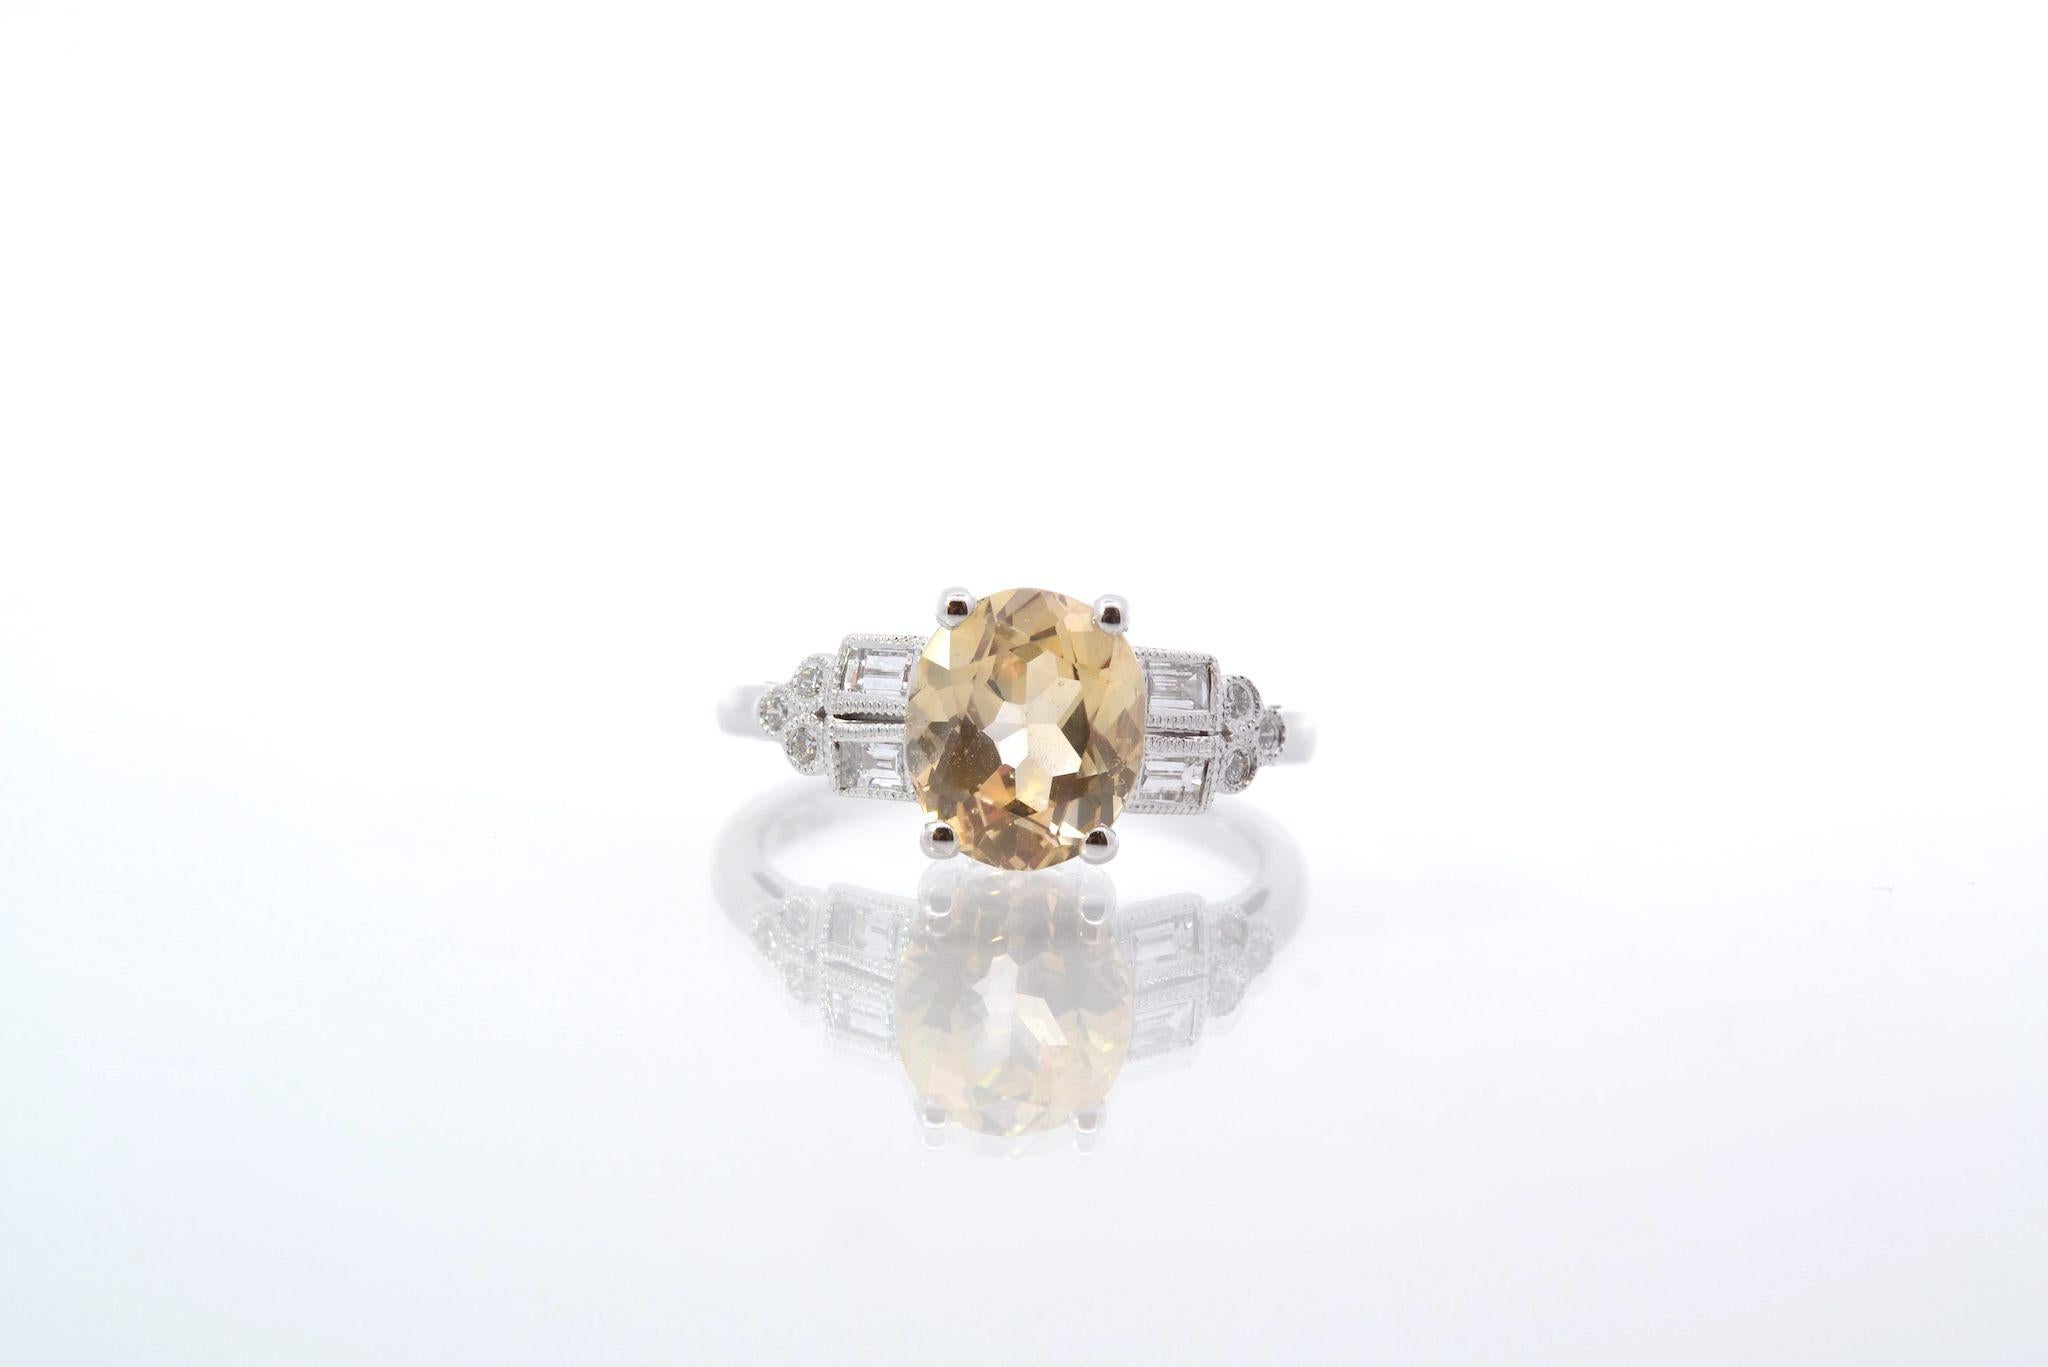 Stones: 1 yellow sapphire of 2.58cts, 4 baguette diamonds: 0.20ct, 6 diamonds: 0.06ct
Material: 18k white gold
Weight: 4g
Period: Recent
Size: 52 (free sizing)
Certificate
Ref. : 25430 25448